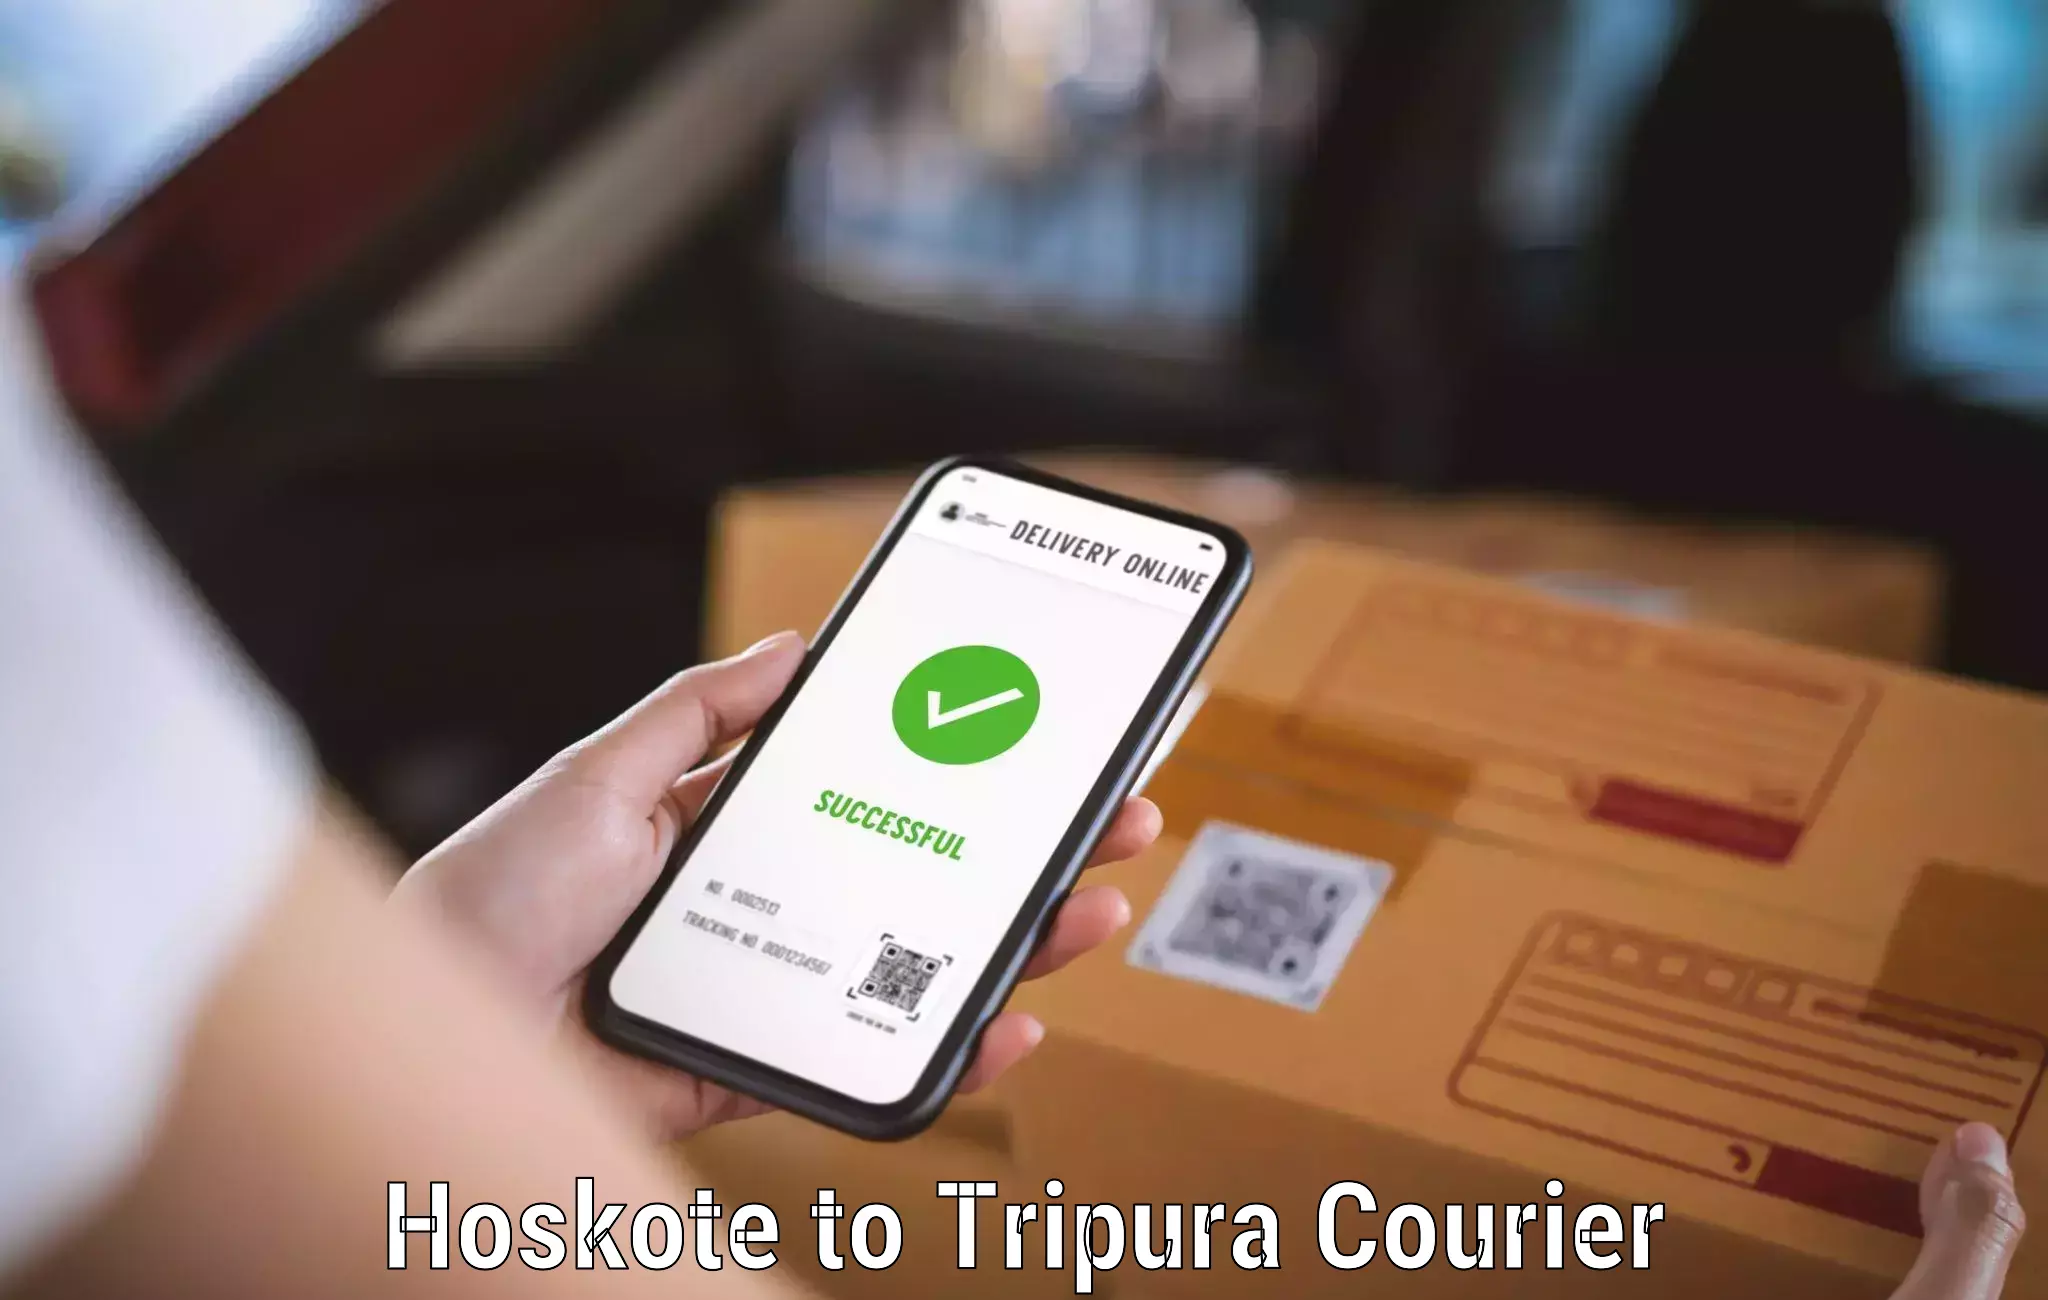 Customized delivery options Hoskote to Udaipur Tripura